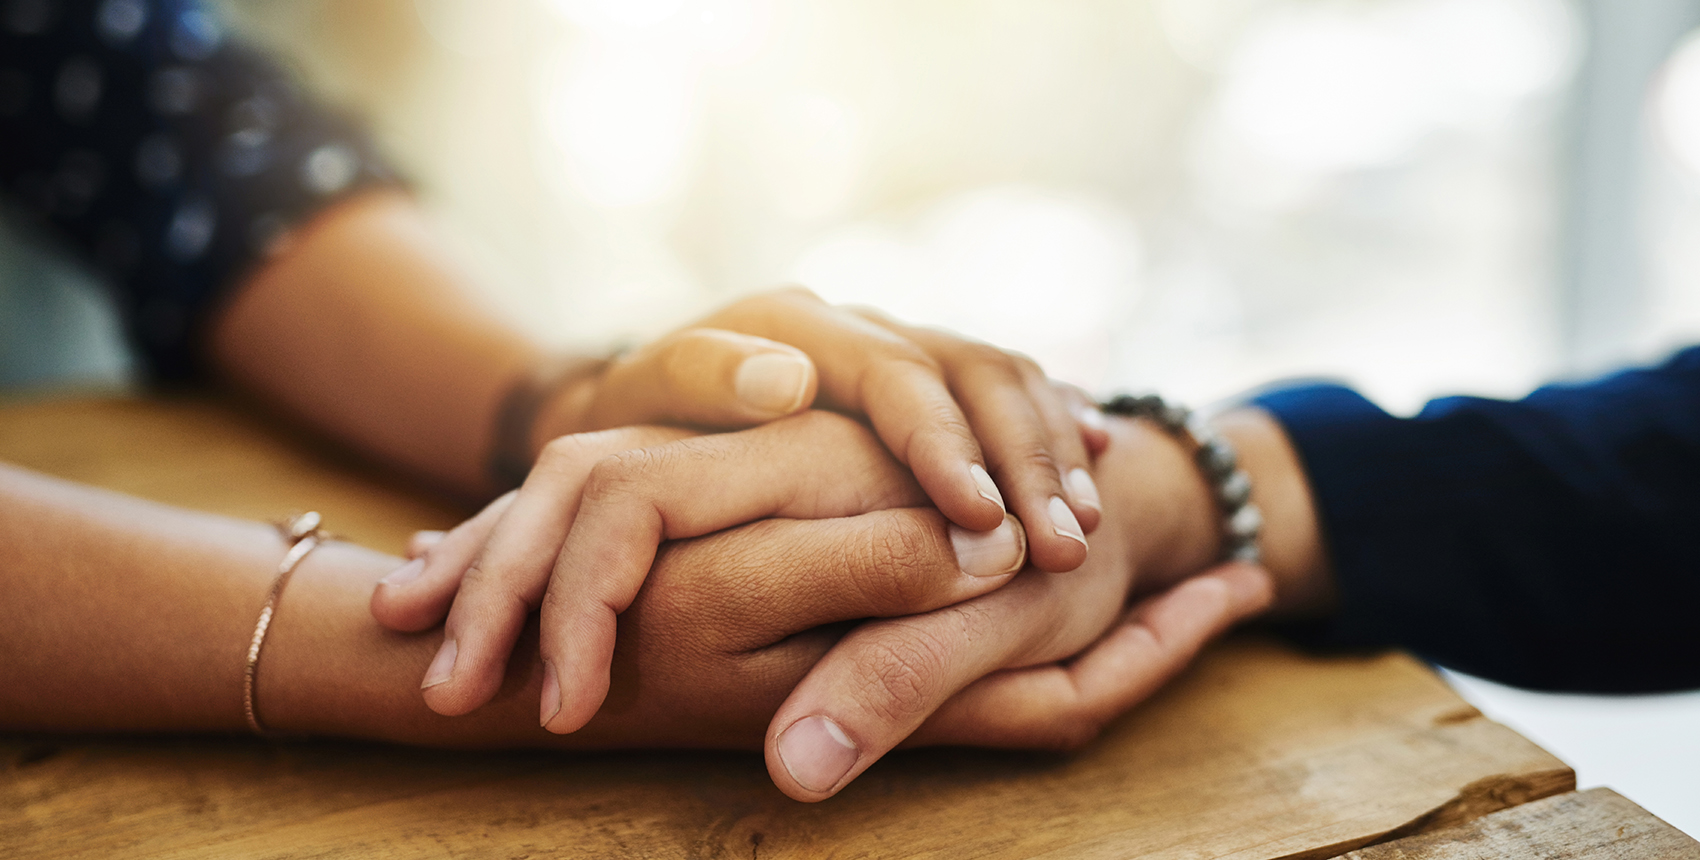 Closeup of two people’s hands clasped together on a table in a comforting manner.